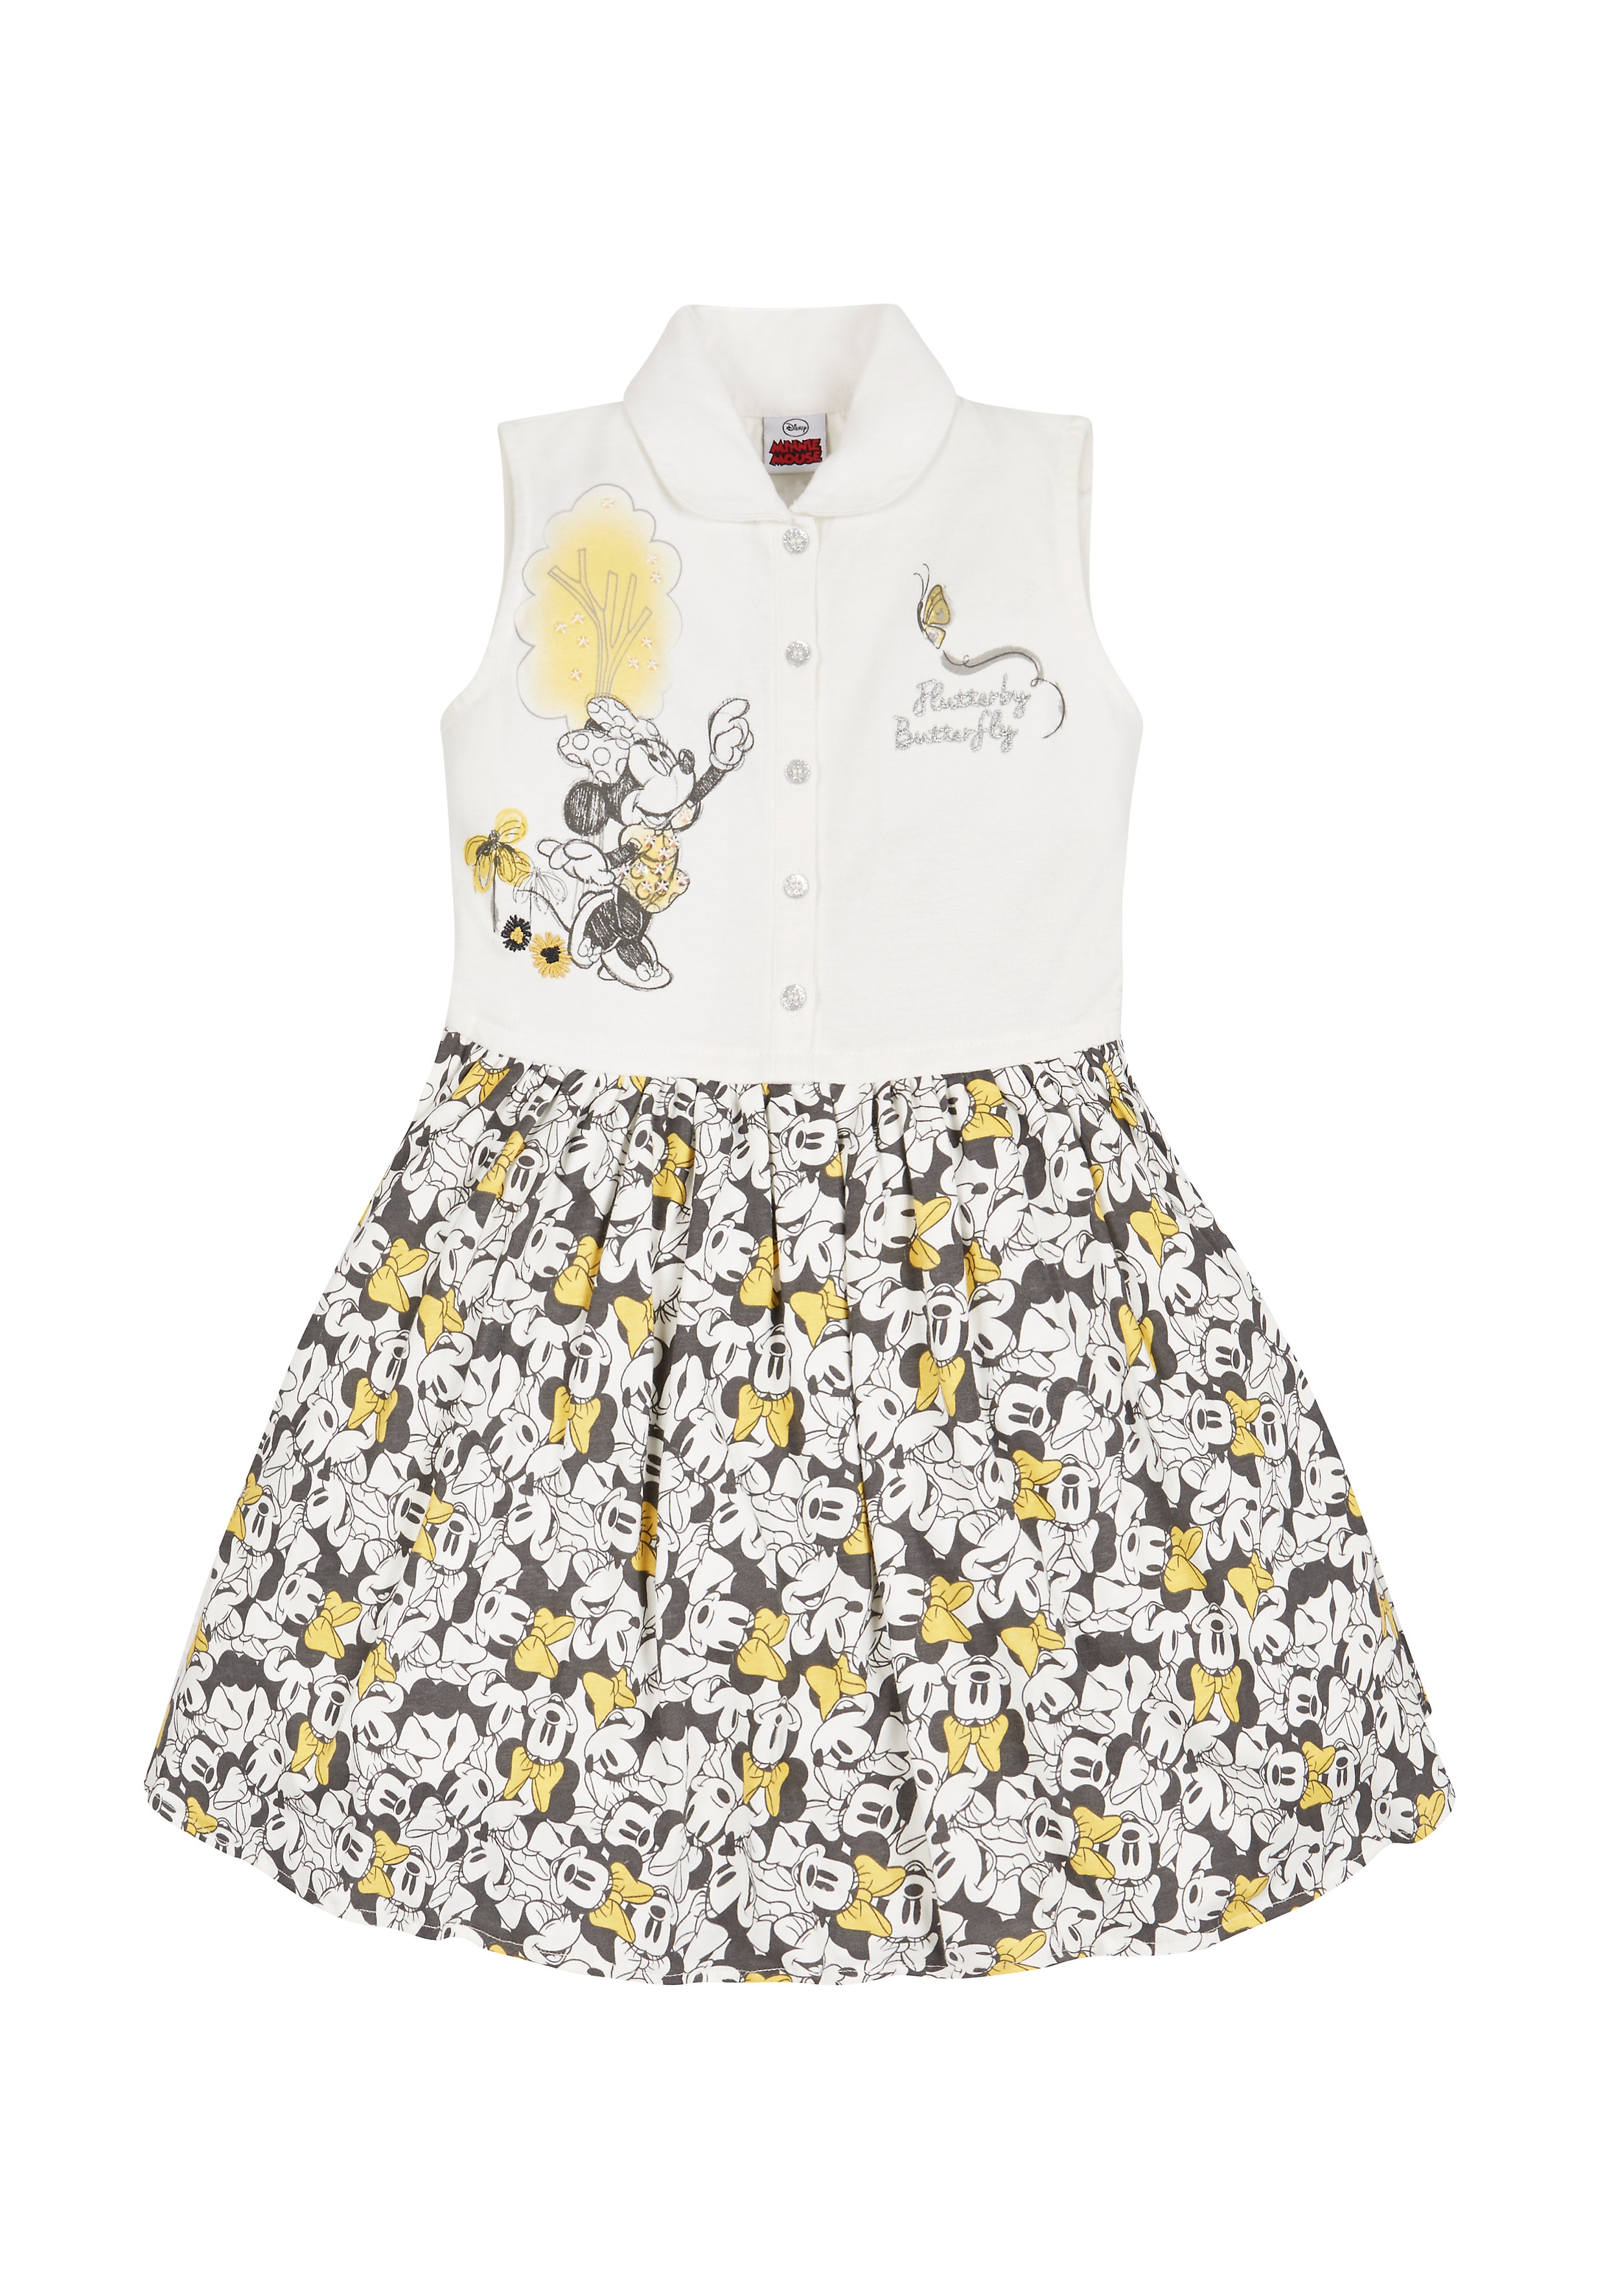 Mothercare | Girls Disney Minnie Mouse Dress 0